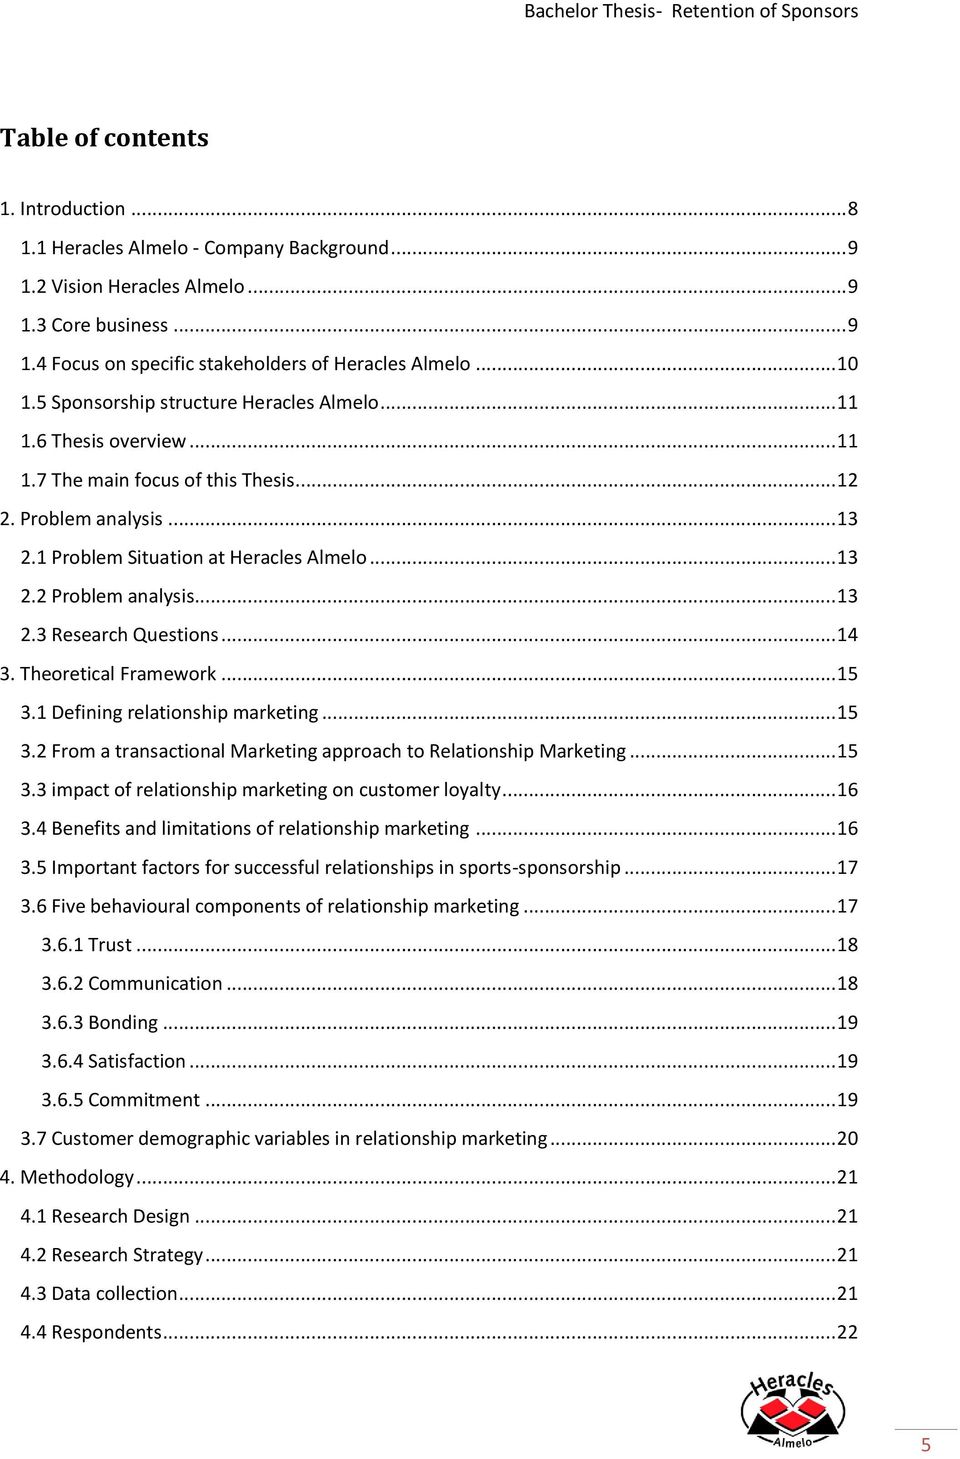 .. 13 2.3 Research Questions... 14 3. Theoretical Framework... 15 3.1 Defining relationship marketing... 15 3.2 From a transactional Marketing approach to Relationship Marketing... 15 3.3 impact of relationship marketing on customer loyalty.